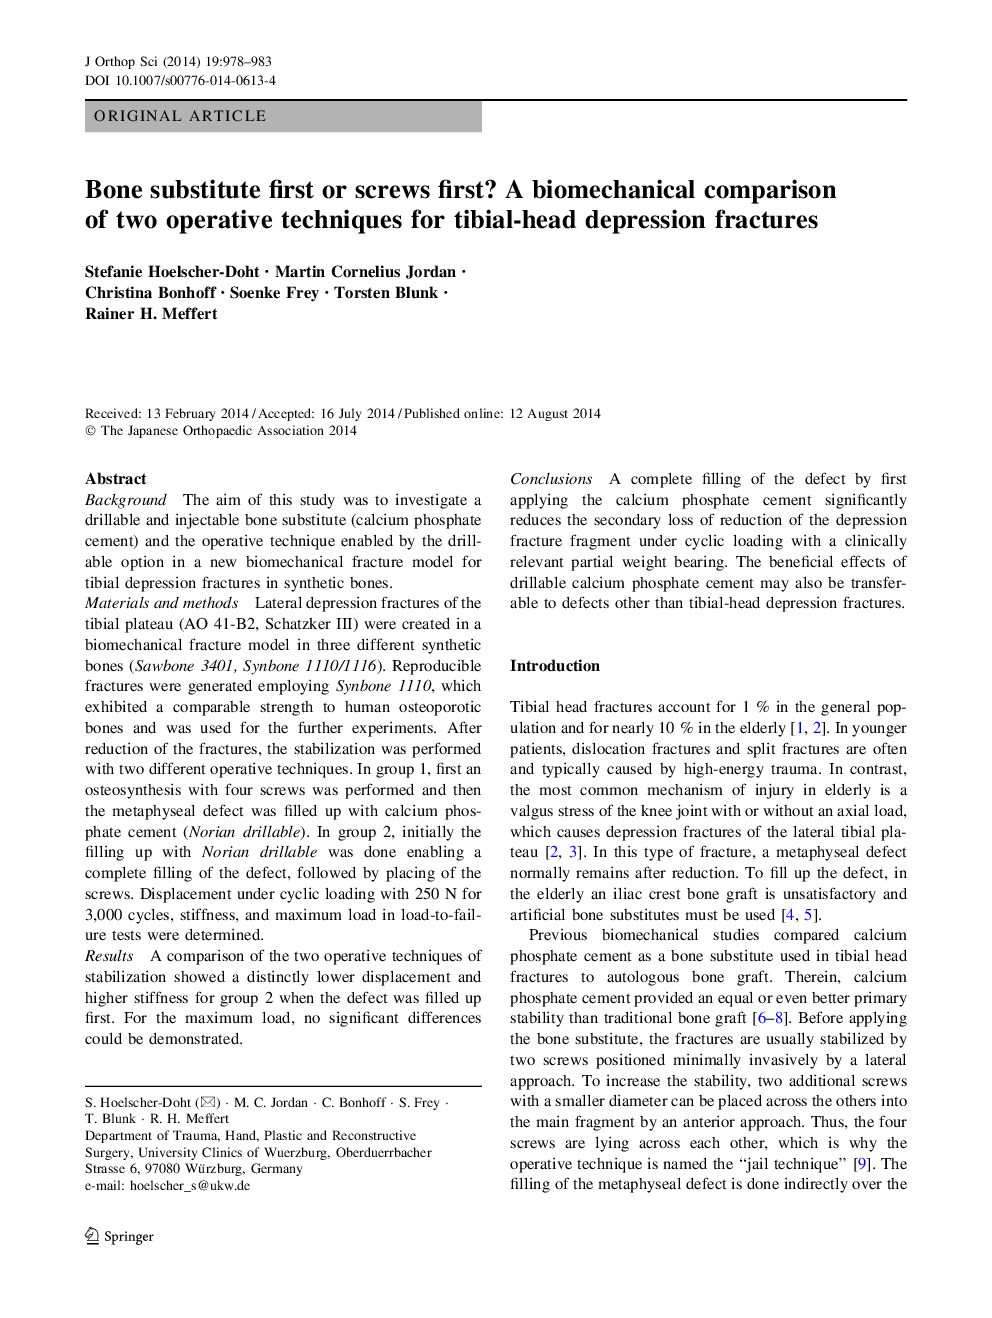 Bone substitute first or screws first? A biomechanical comparison of two operative techniques for tibial-head depression fractures